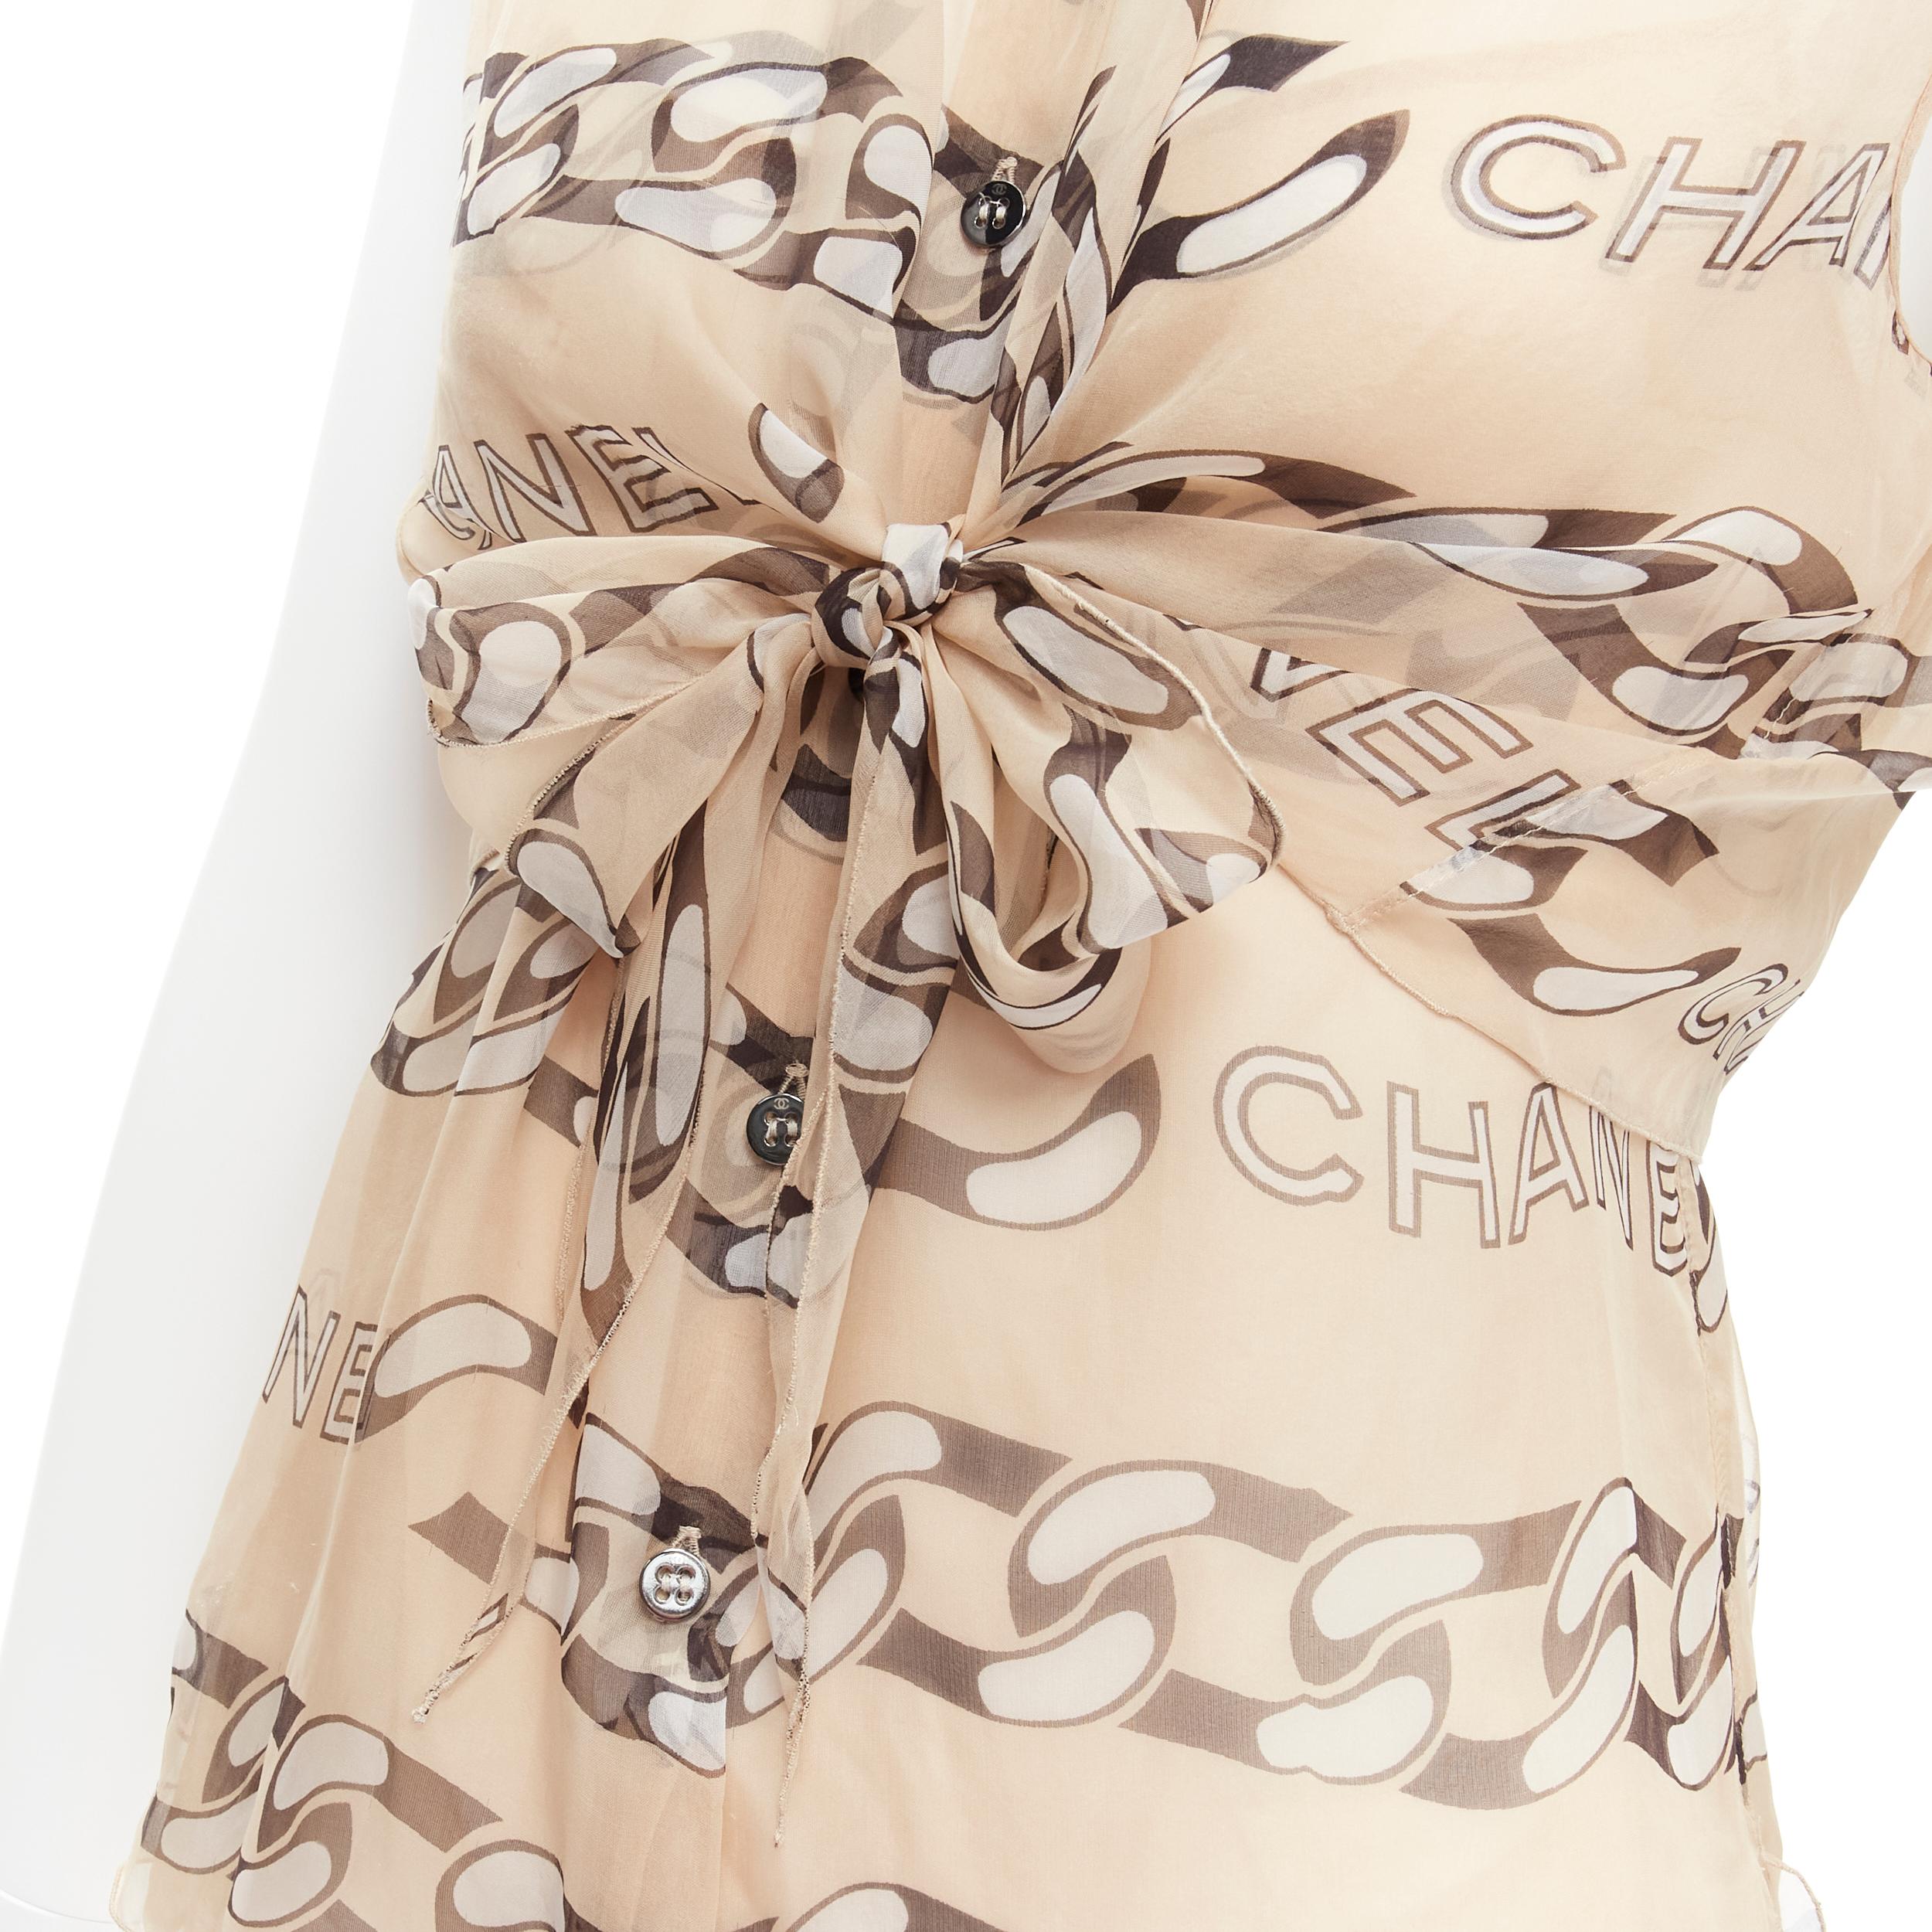 CHANEL 01A Vintage Runway black CC logo chain nude silk front tie blouse FR40 M
Reference: TGAS/C02013
Brand: Chanel
Designer: Karl Lagerfeld
Collection: Fall 2001 - Runway
Material: Silk
Color: Nude, Black
Pattern: Abstract
Closure: Self